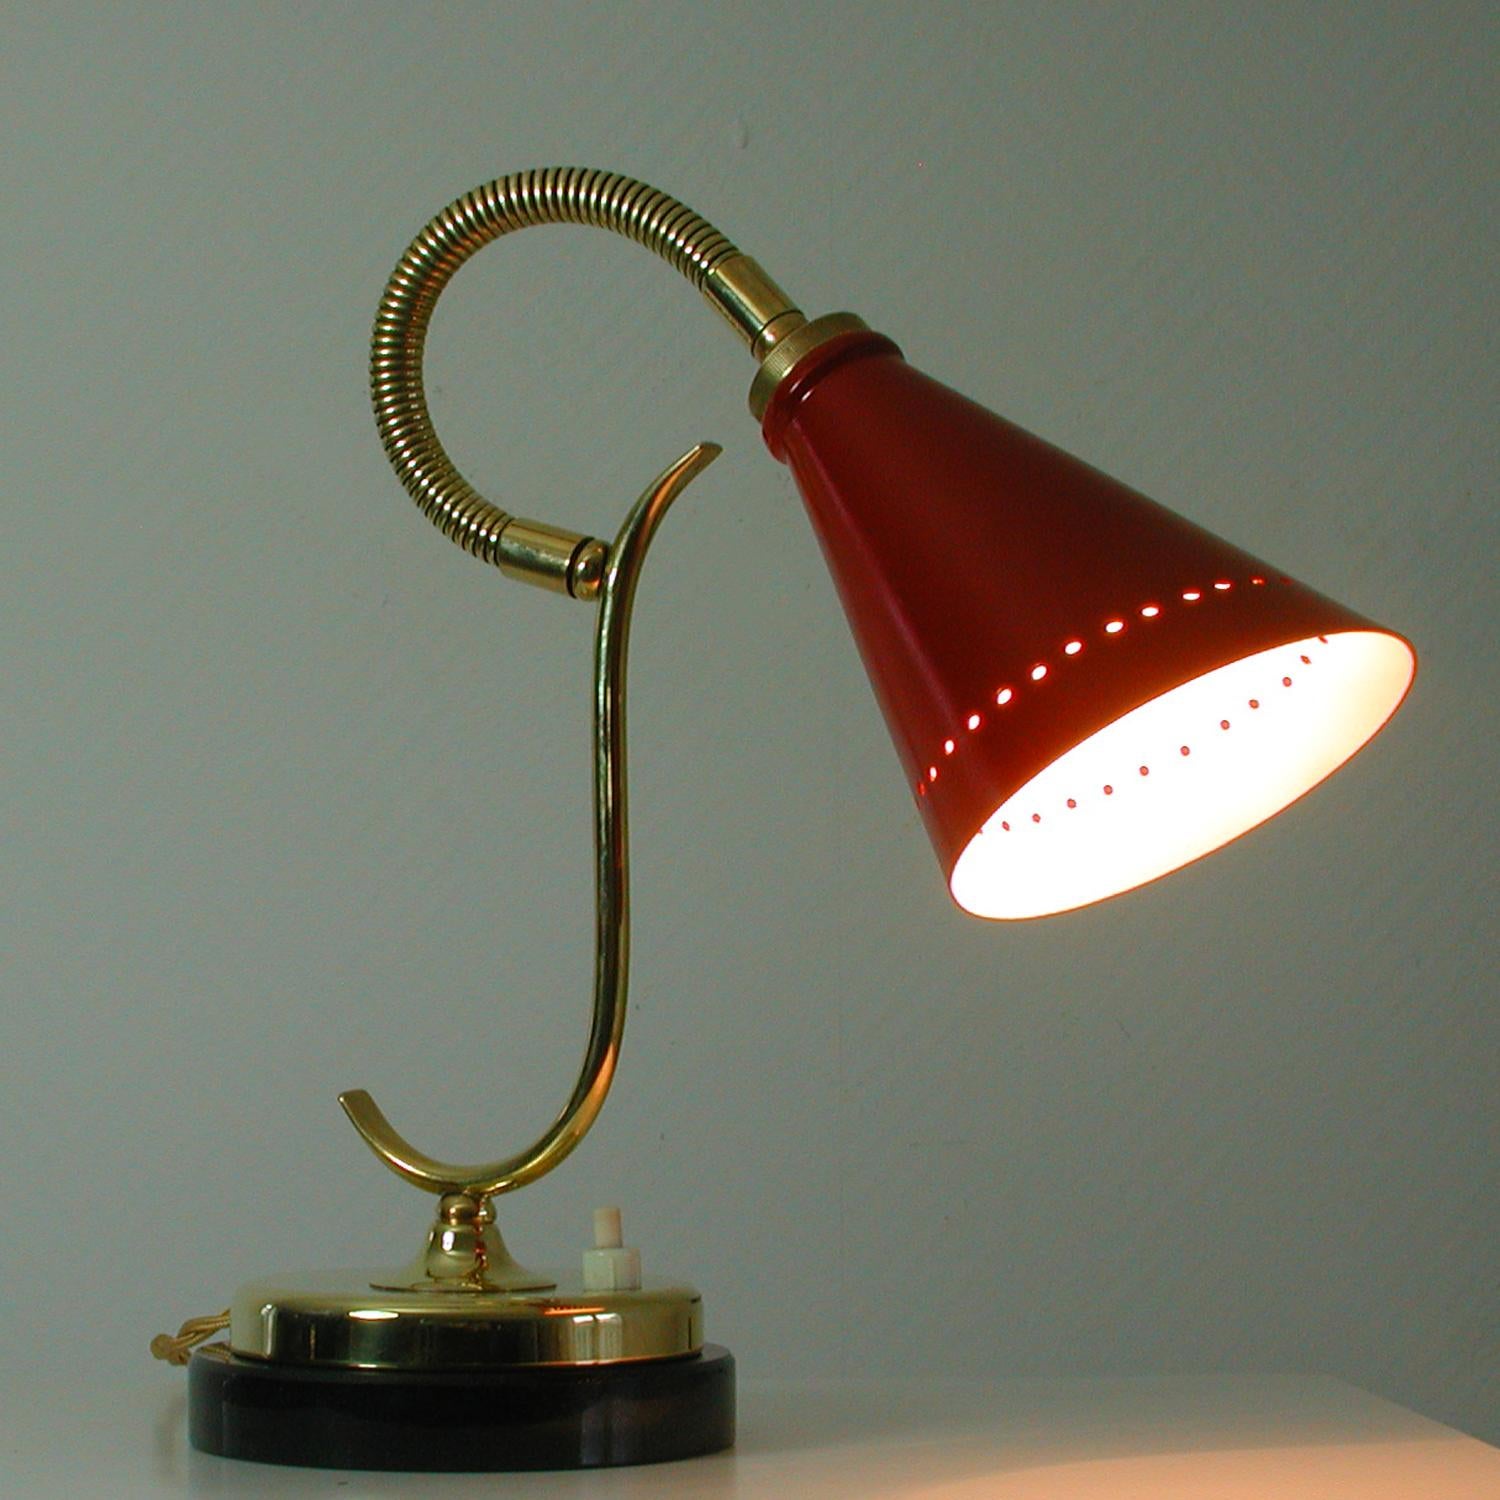 French Midcentury Red Brass and Marble Gooseneck Table Lamp, 1950s For Sale 3